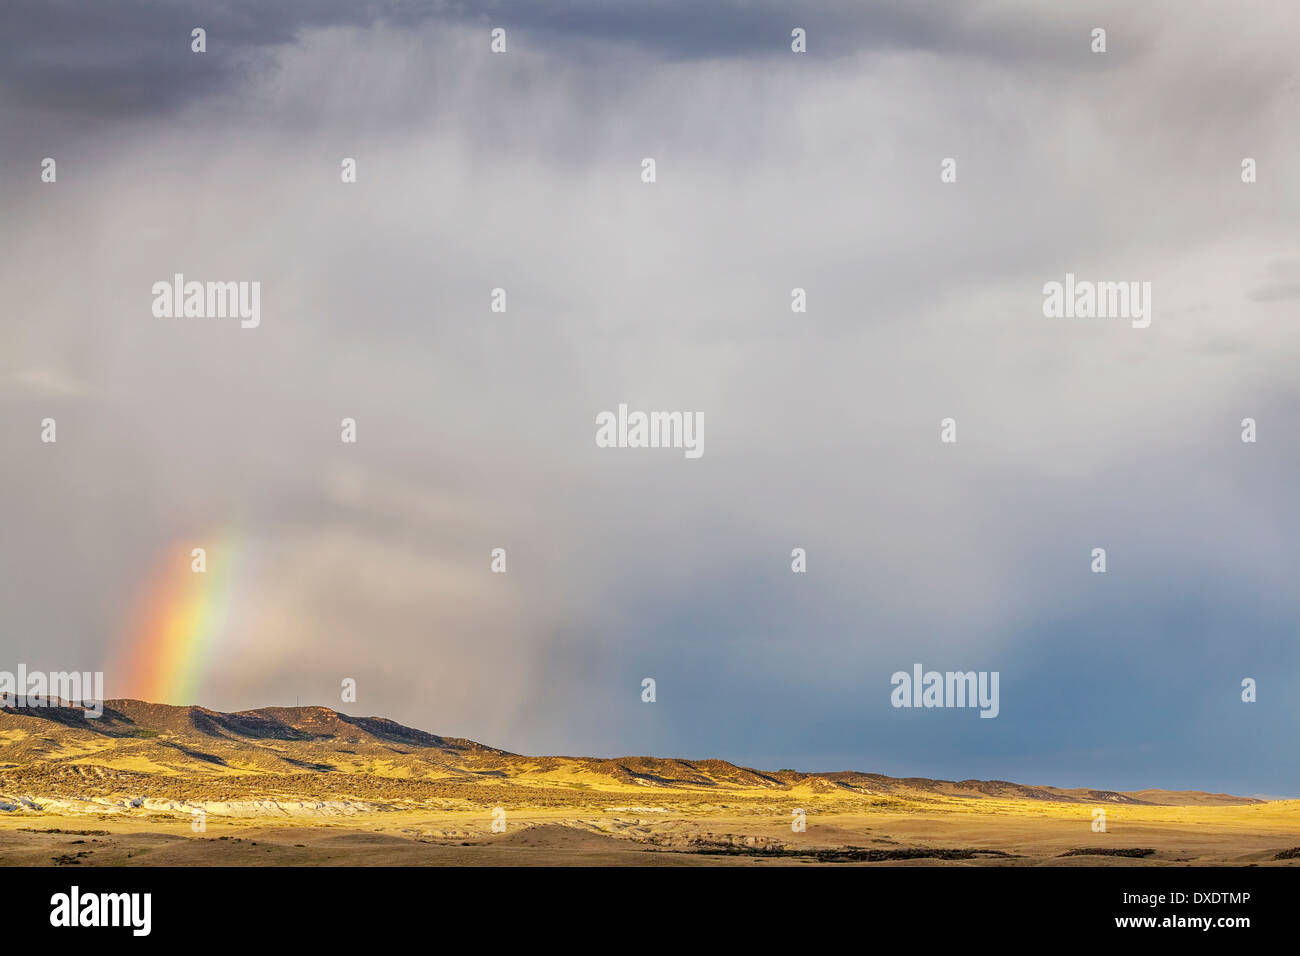 heavy storm clouds and rainbow over prairie in northern Colorado - Soapstone Prairie Natural Area Stock Photo